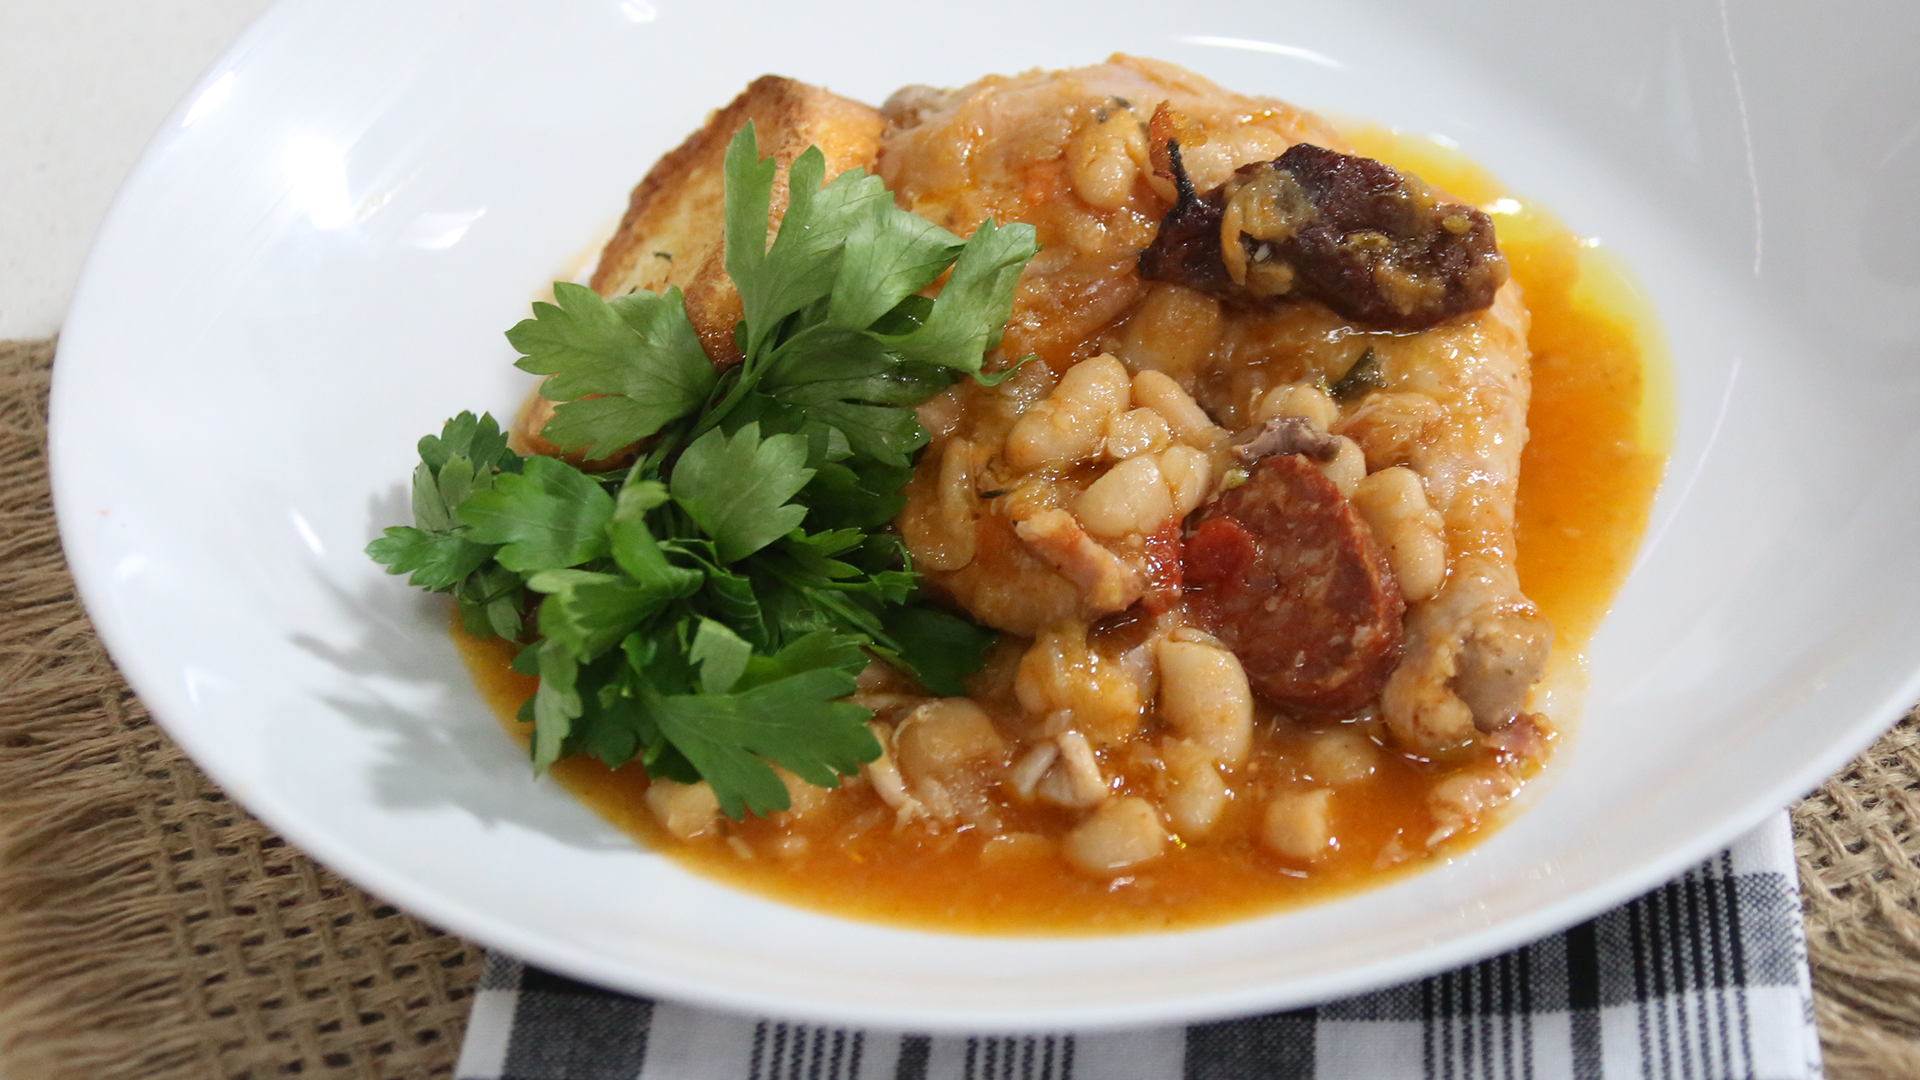 Cheap and cheerful cassoulet